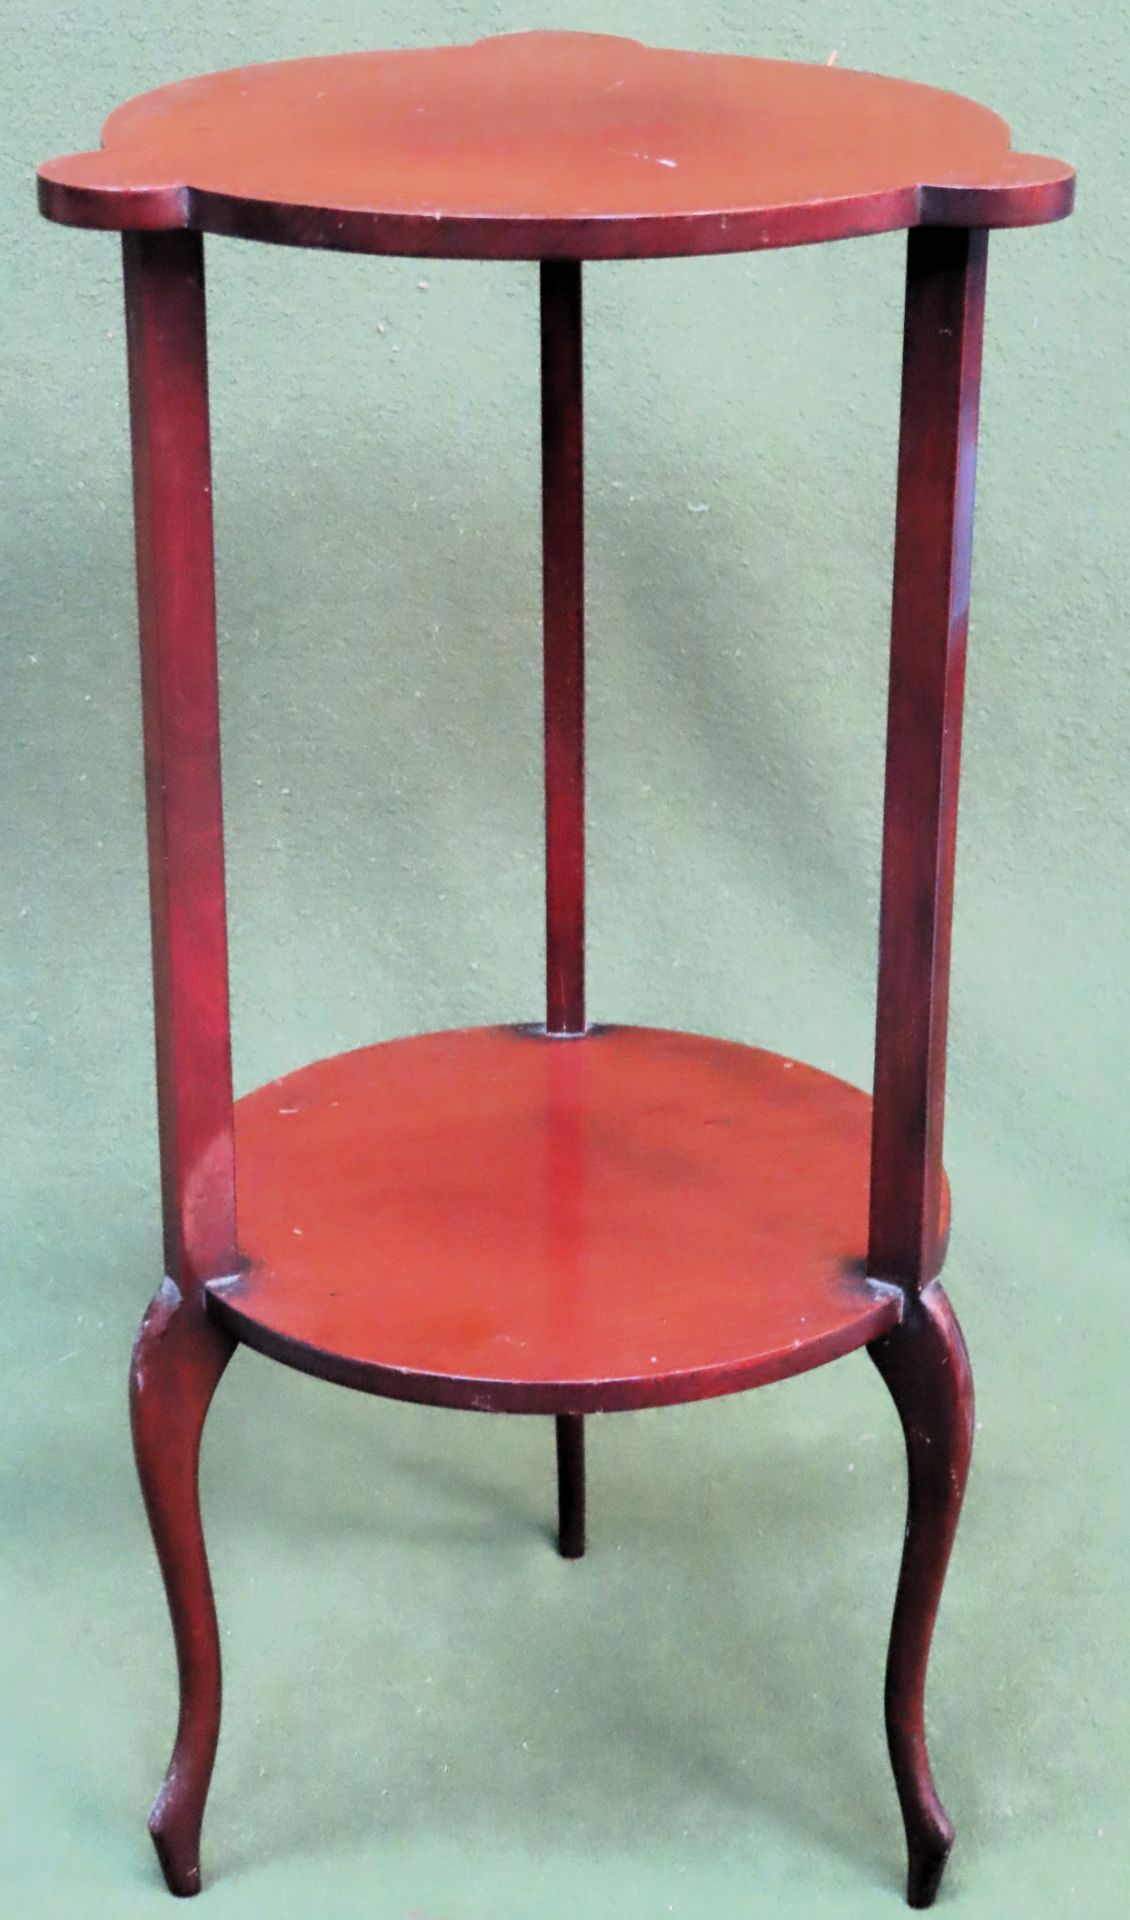 Art Nouveau style mahogany plant stand. Approx. 54 x 29cm Diameter Used condition, scuffs and